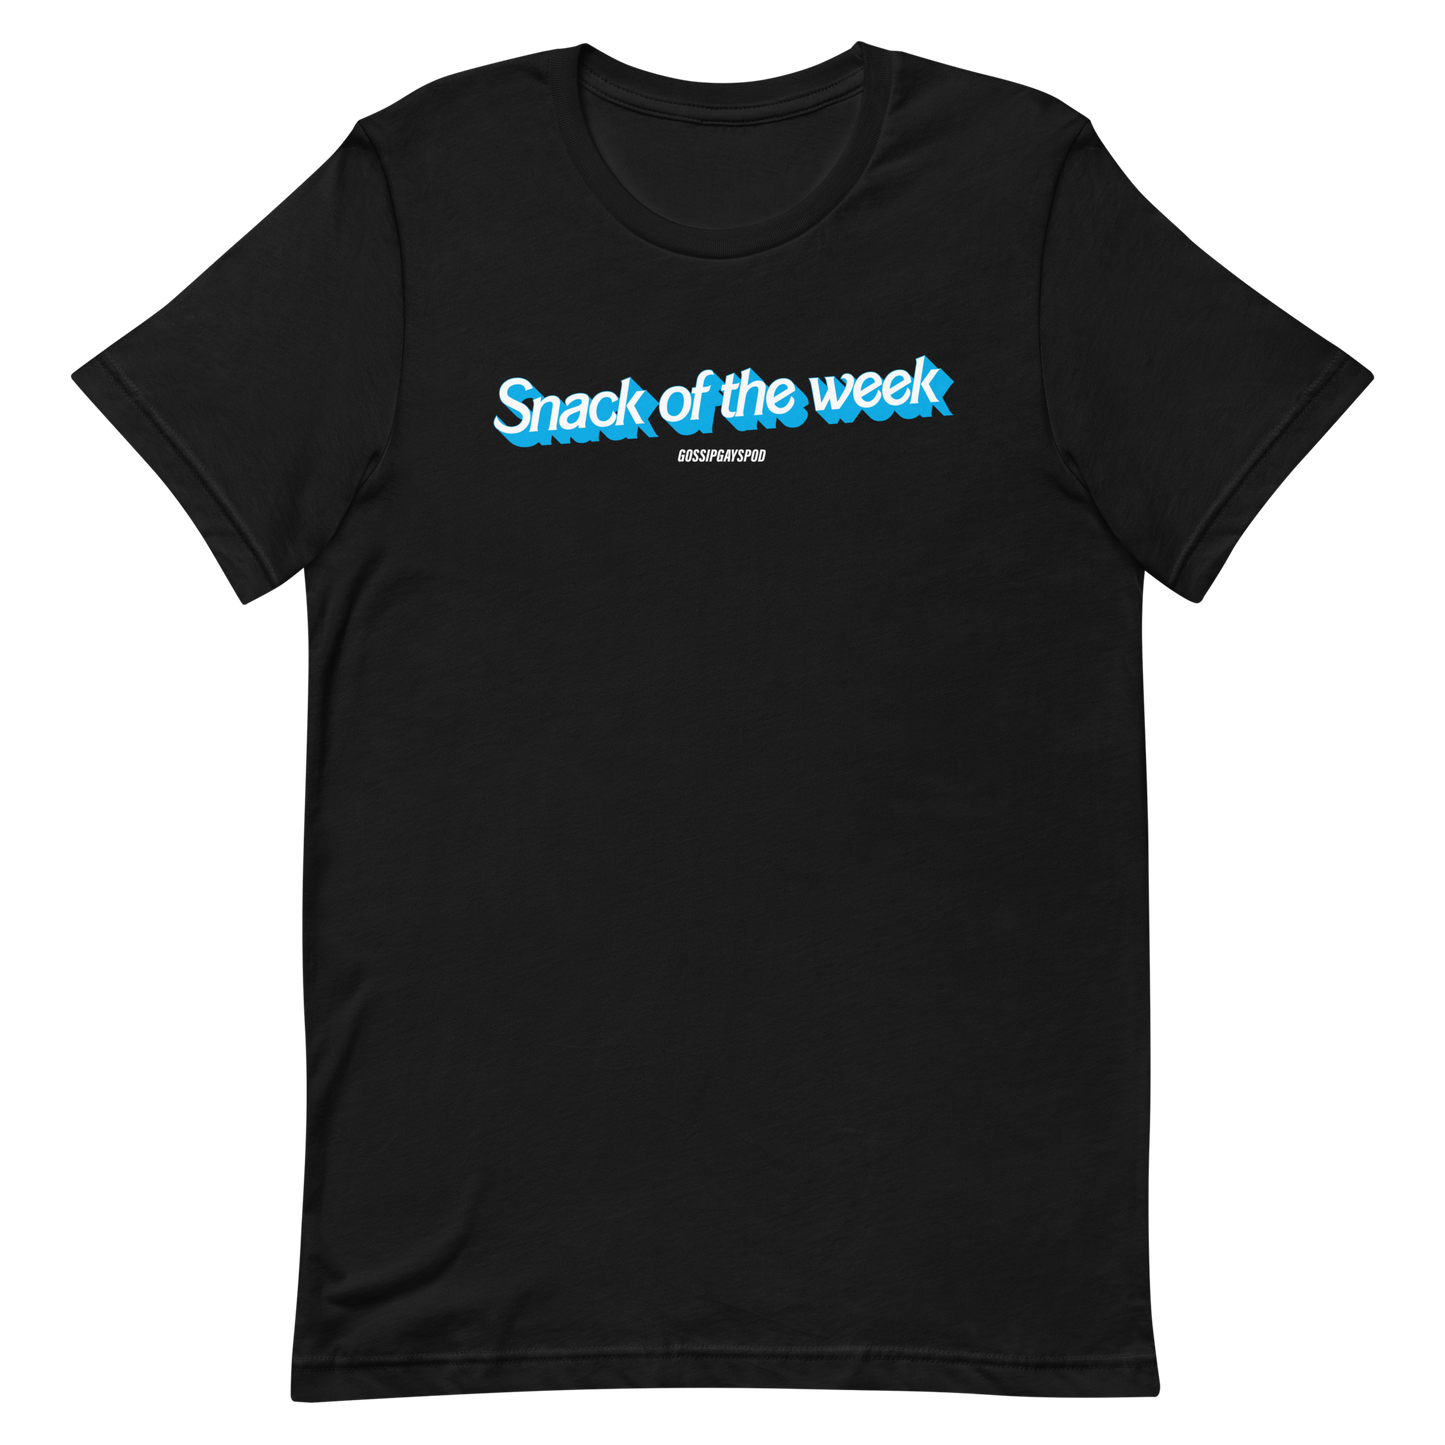 The Gossip Gays Snack of the Week T-shirt Blue